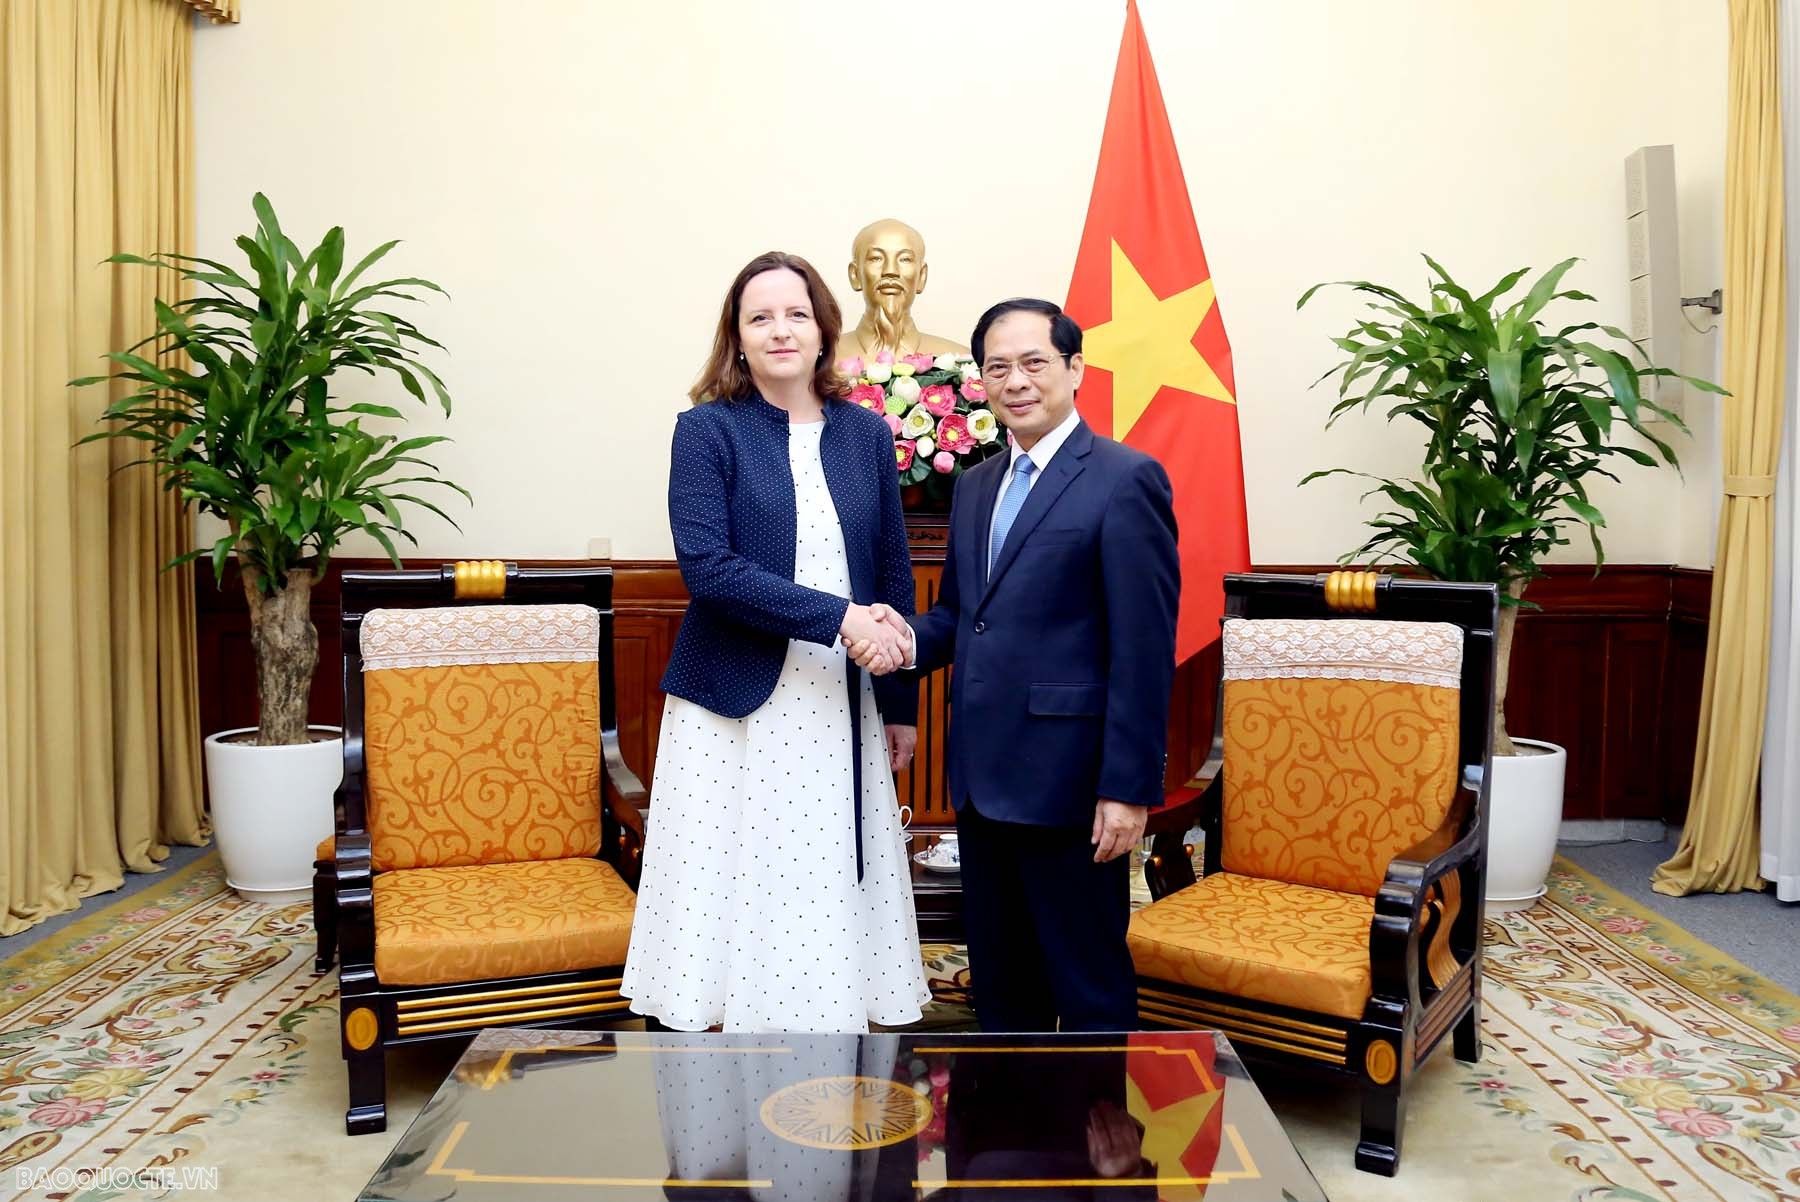 FM Bui Thanh Son received Polish Undersecretary of State to strengthen multifaceted ties